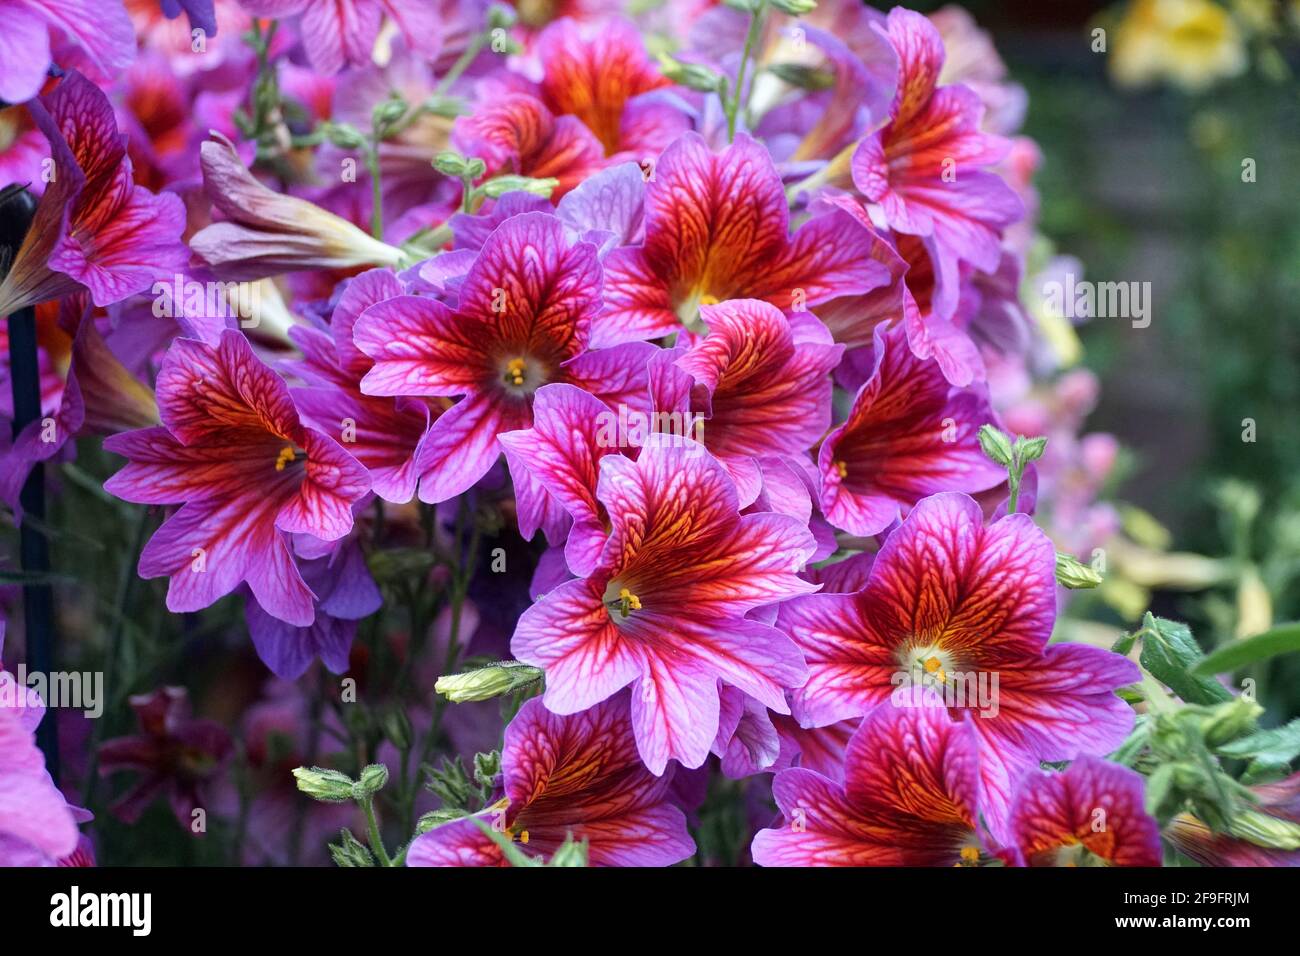 Bright purple and red colors of Painted-Tongue flower, with scientific name Salpiglossis Sinuata Stock Photo